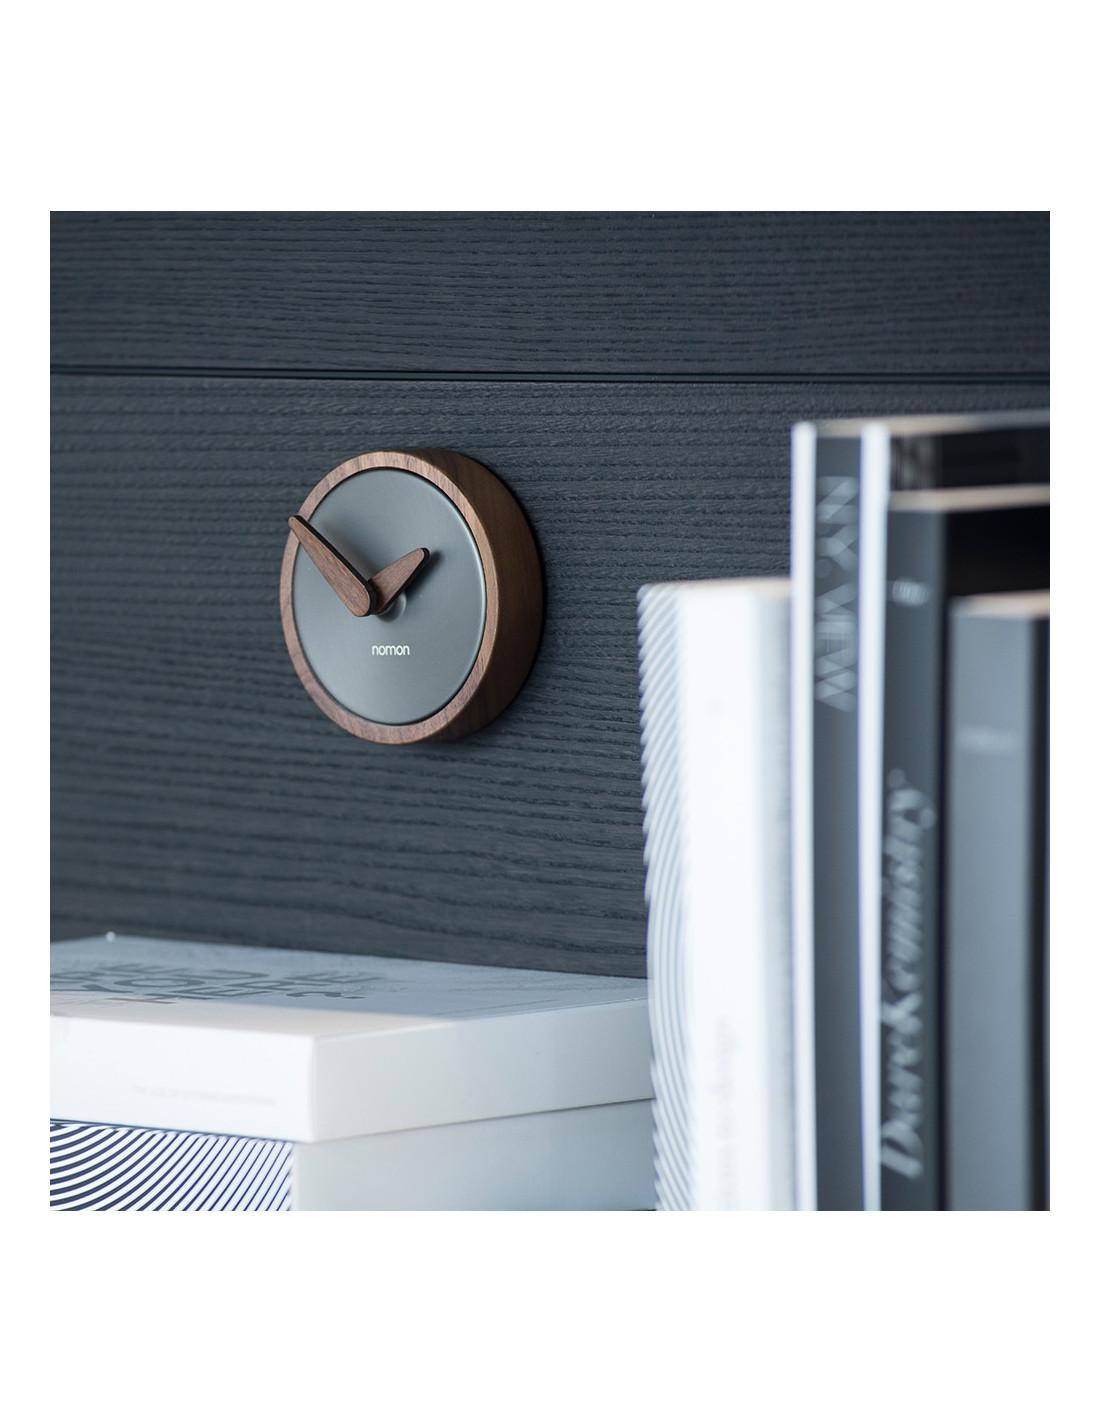 Atom Wall Clock ensures a completely innovative and long-lasting setting that covers your space with great uniformity and good taste
Atom T Wall Clock : Box in graphite finished brass, hands and body in walnut.
Not OK for Outdoor Use
Warranty: 2